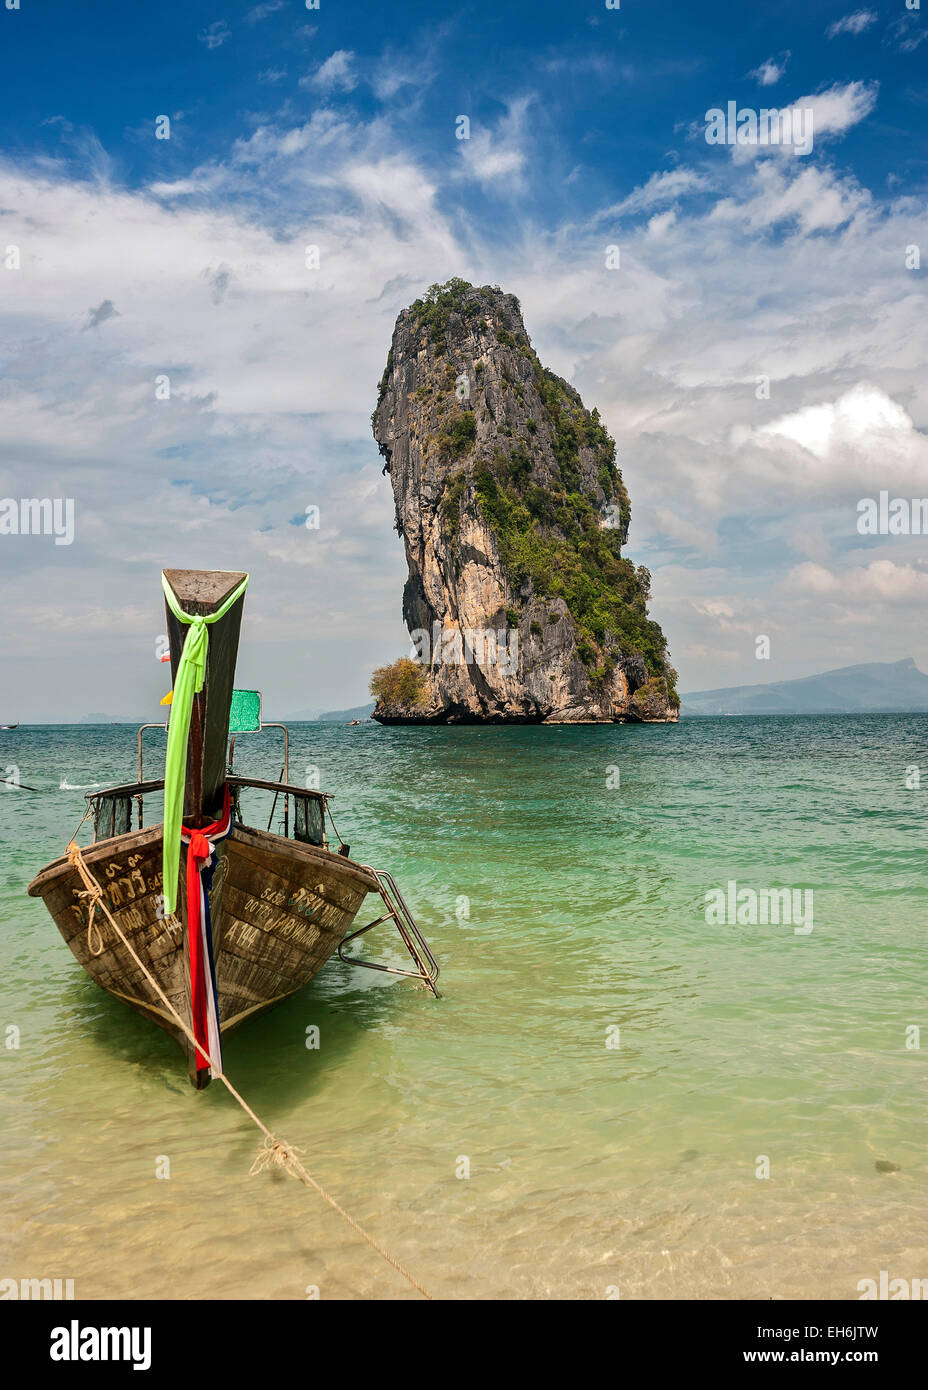 Thailand, Krabi province . The islands in the Andaman Sea . Boat locals Long Tail. Stock Photo